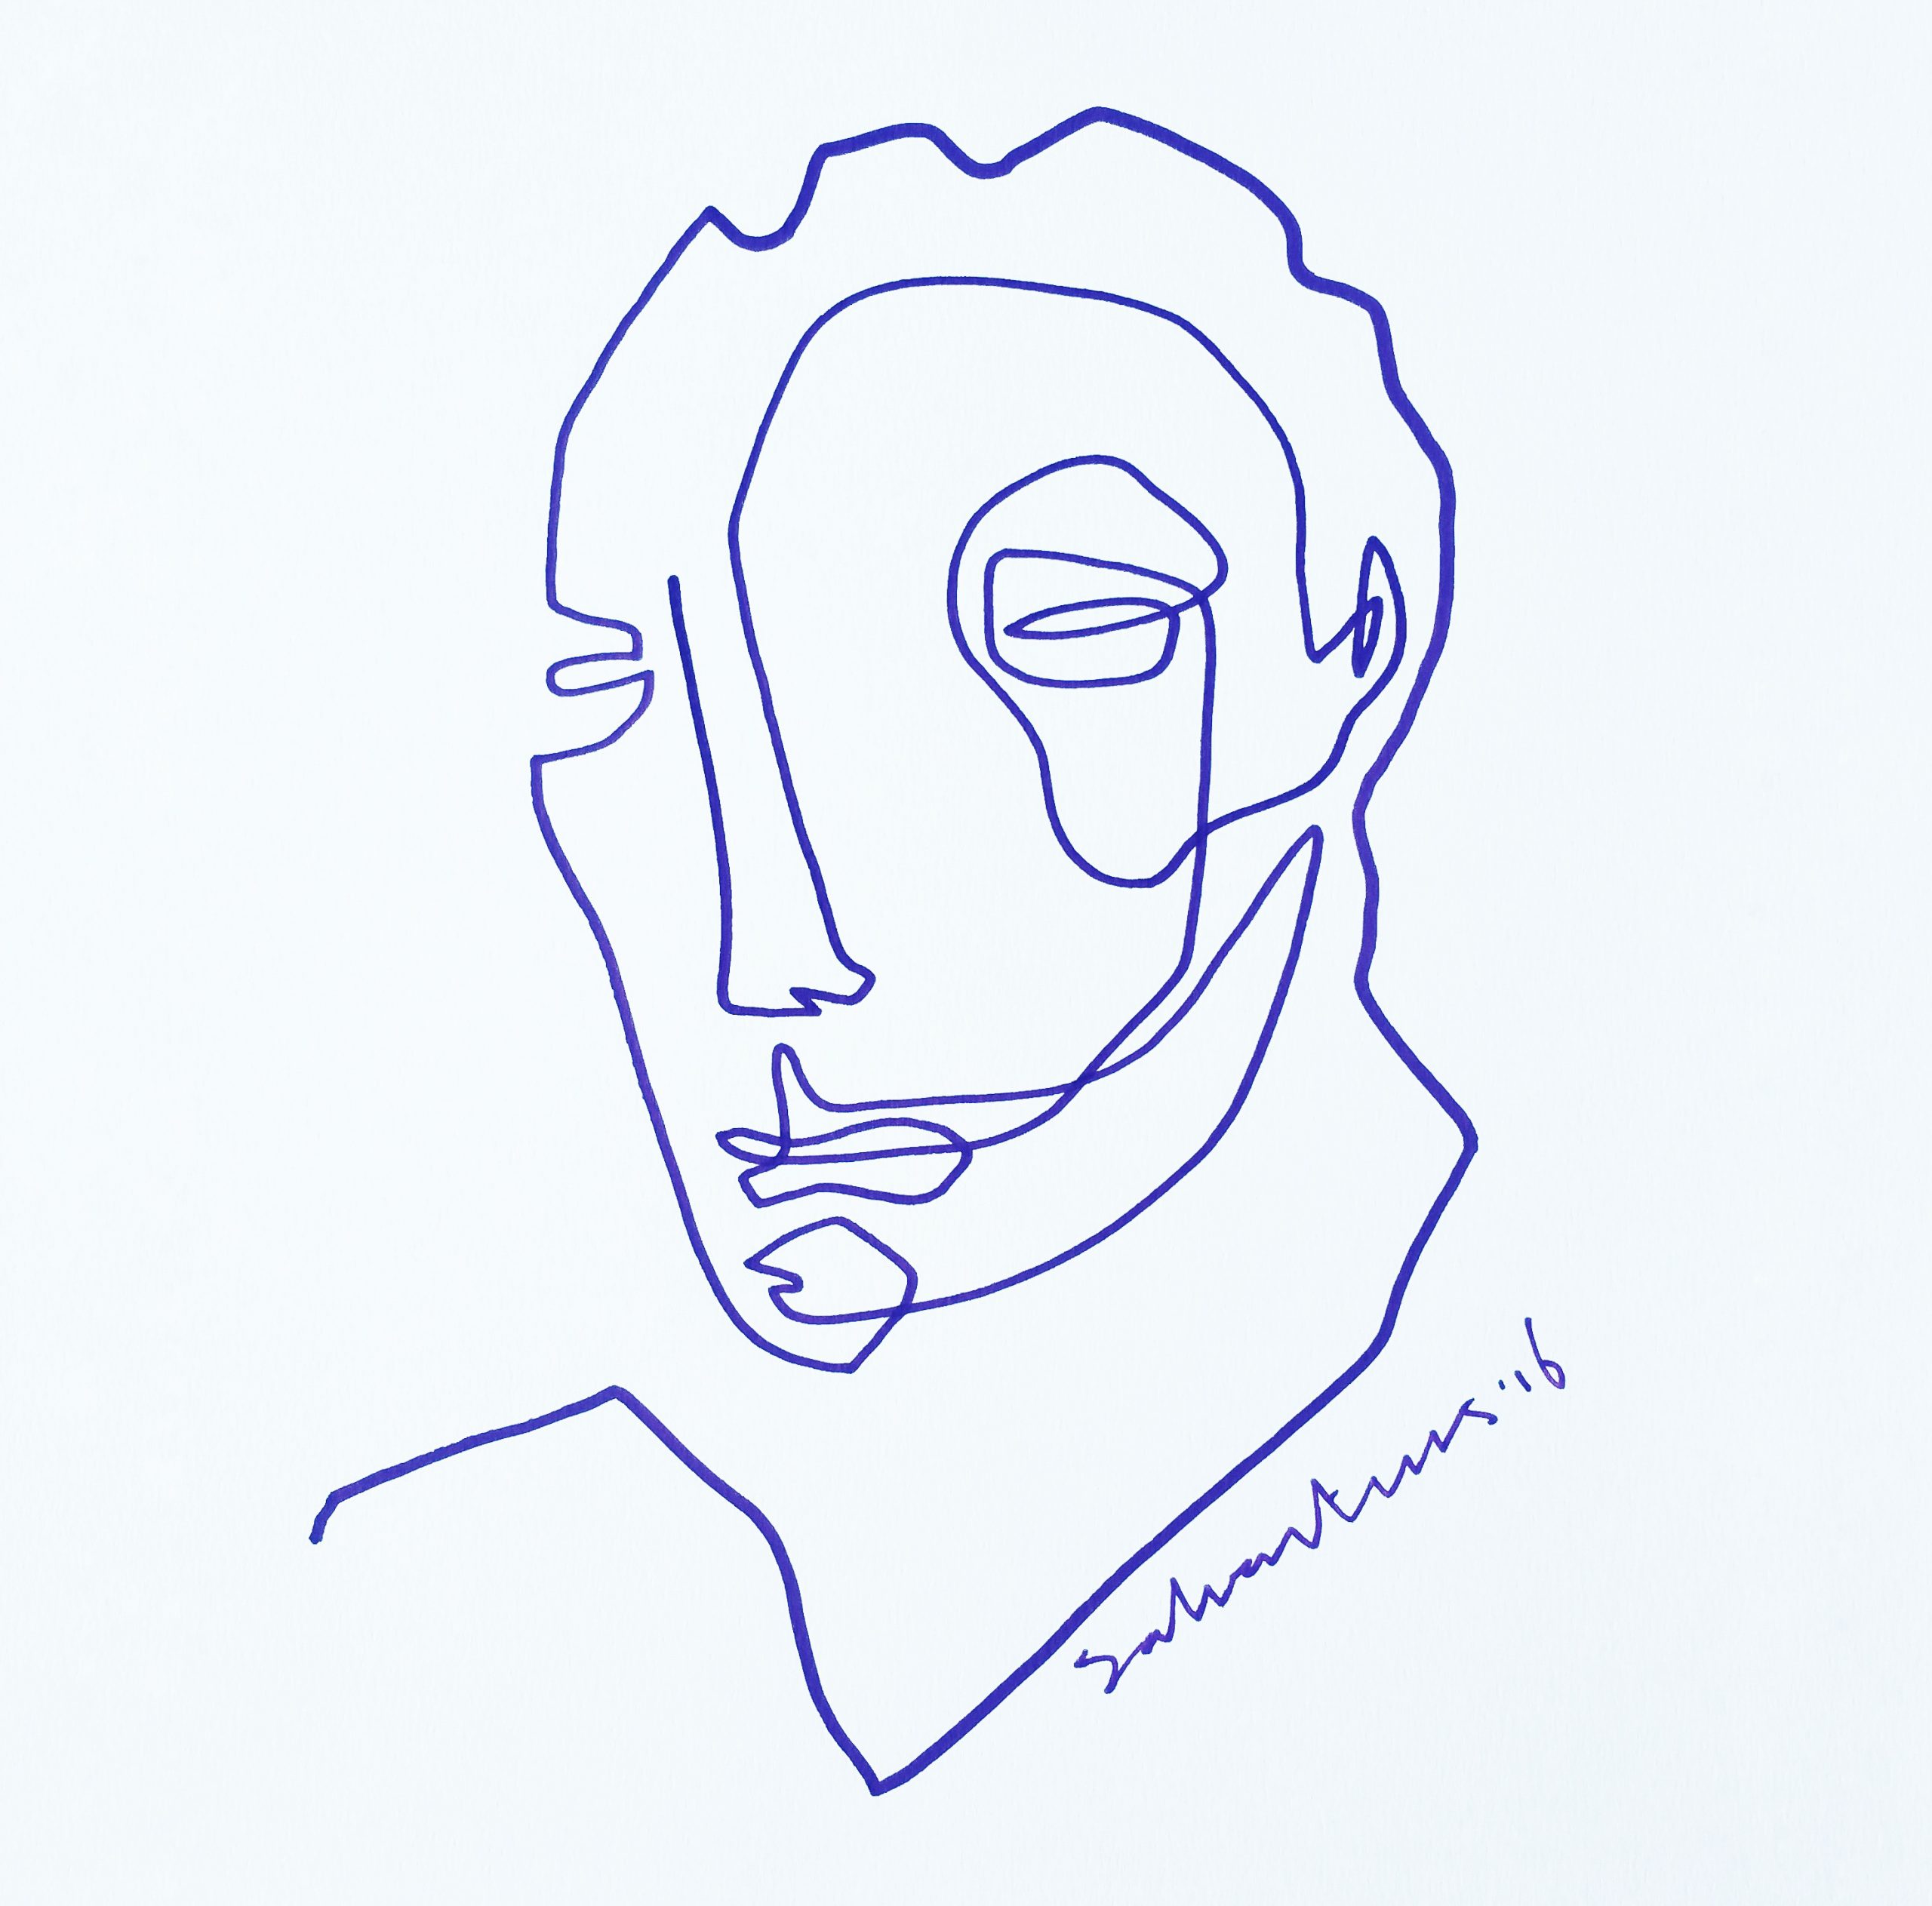 One line drawing